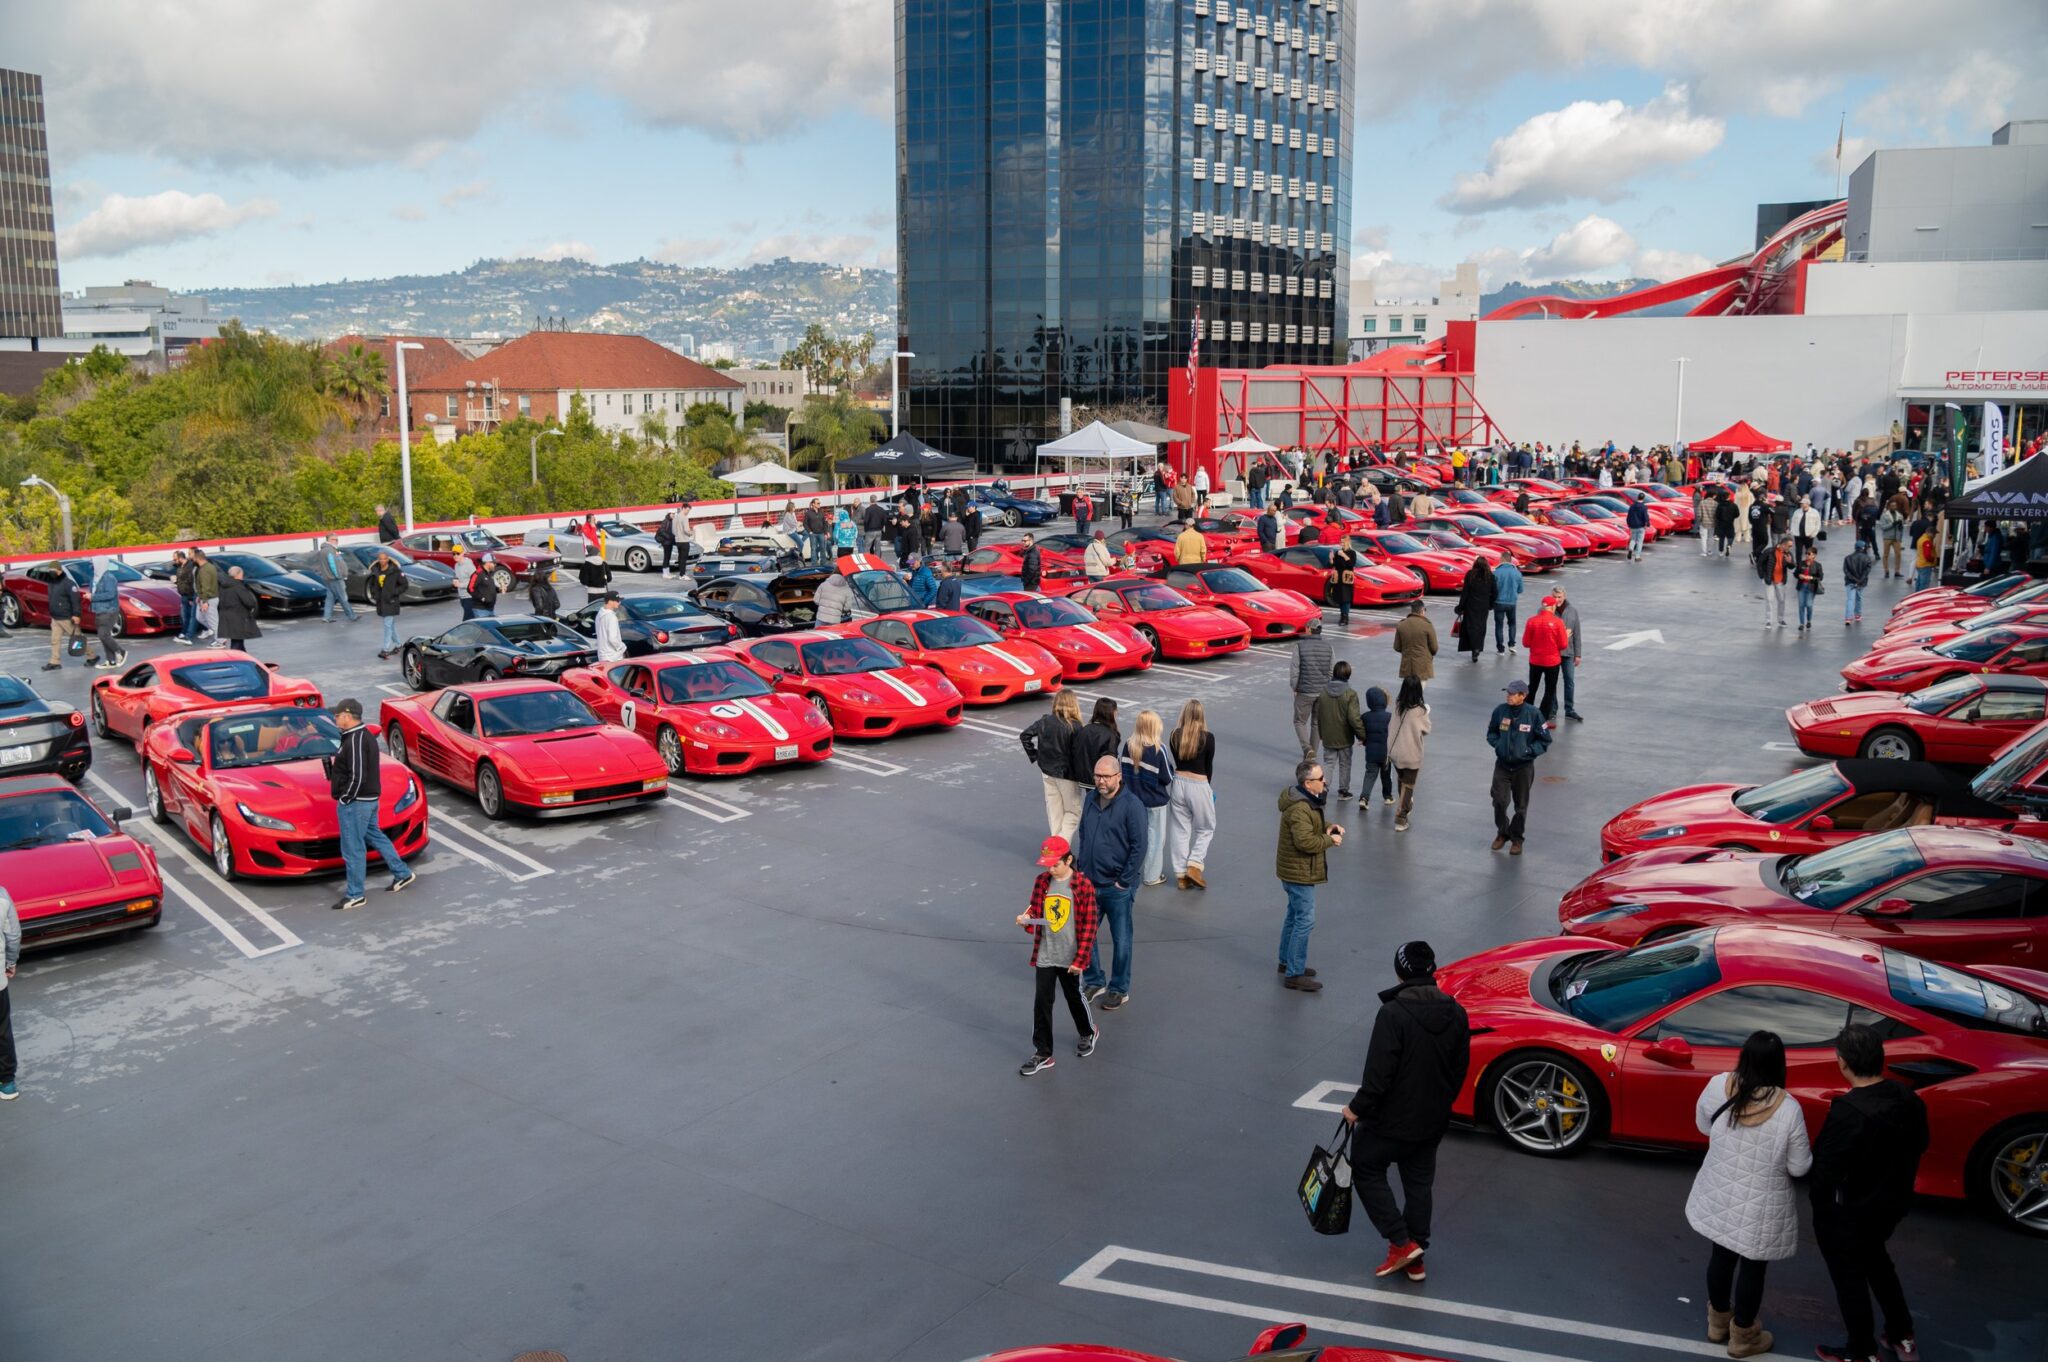 An image of a Ferrari lineup and people walking amongst them.